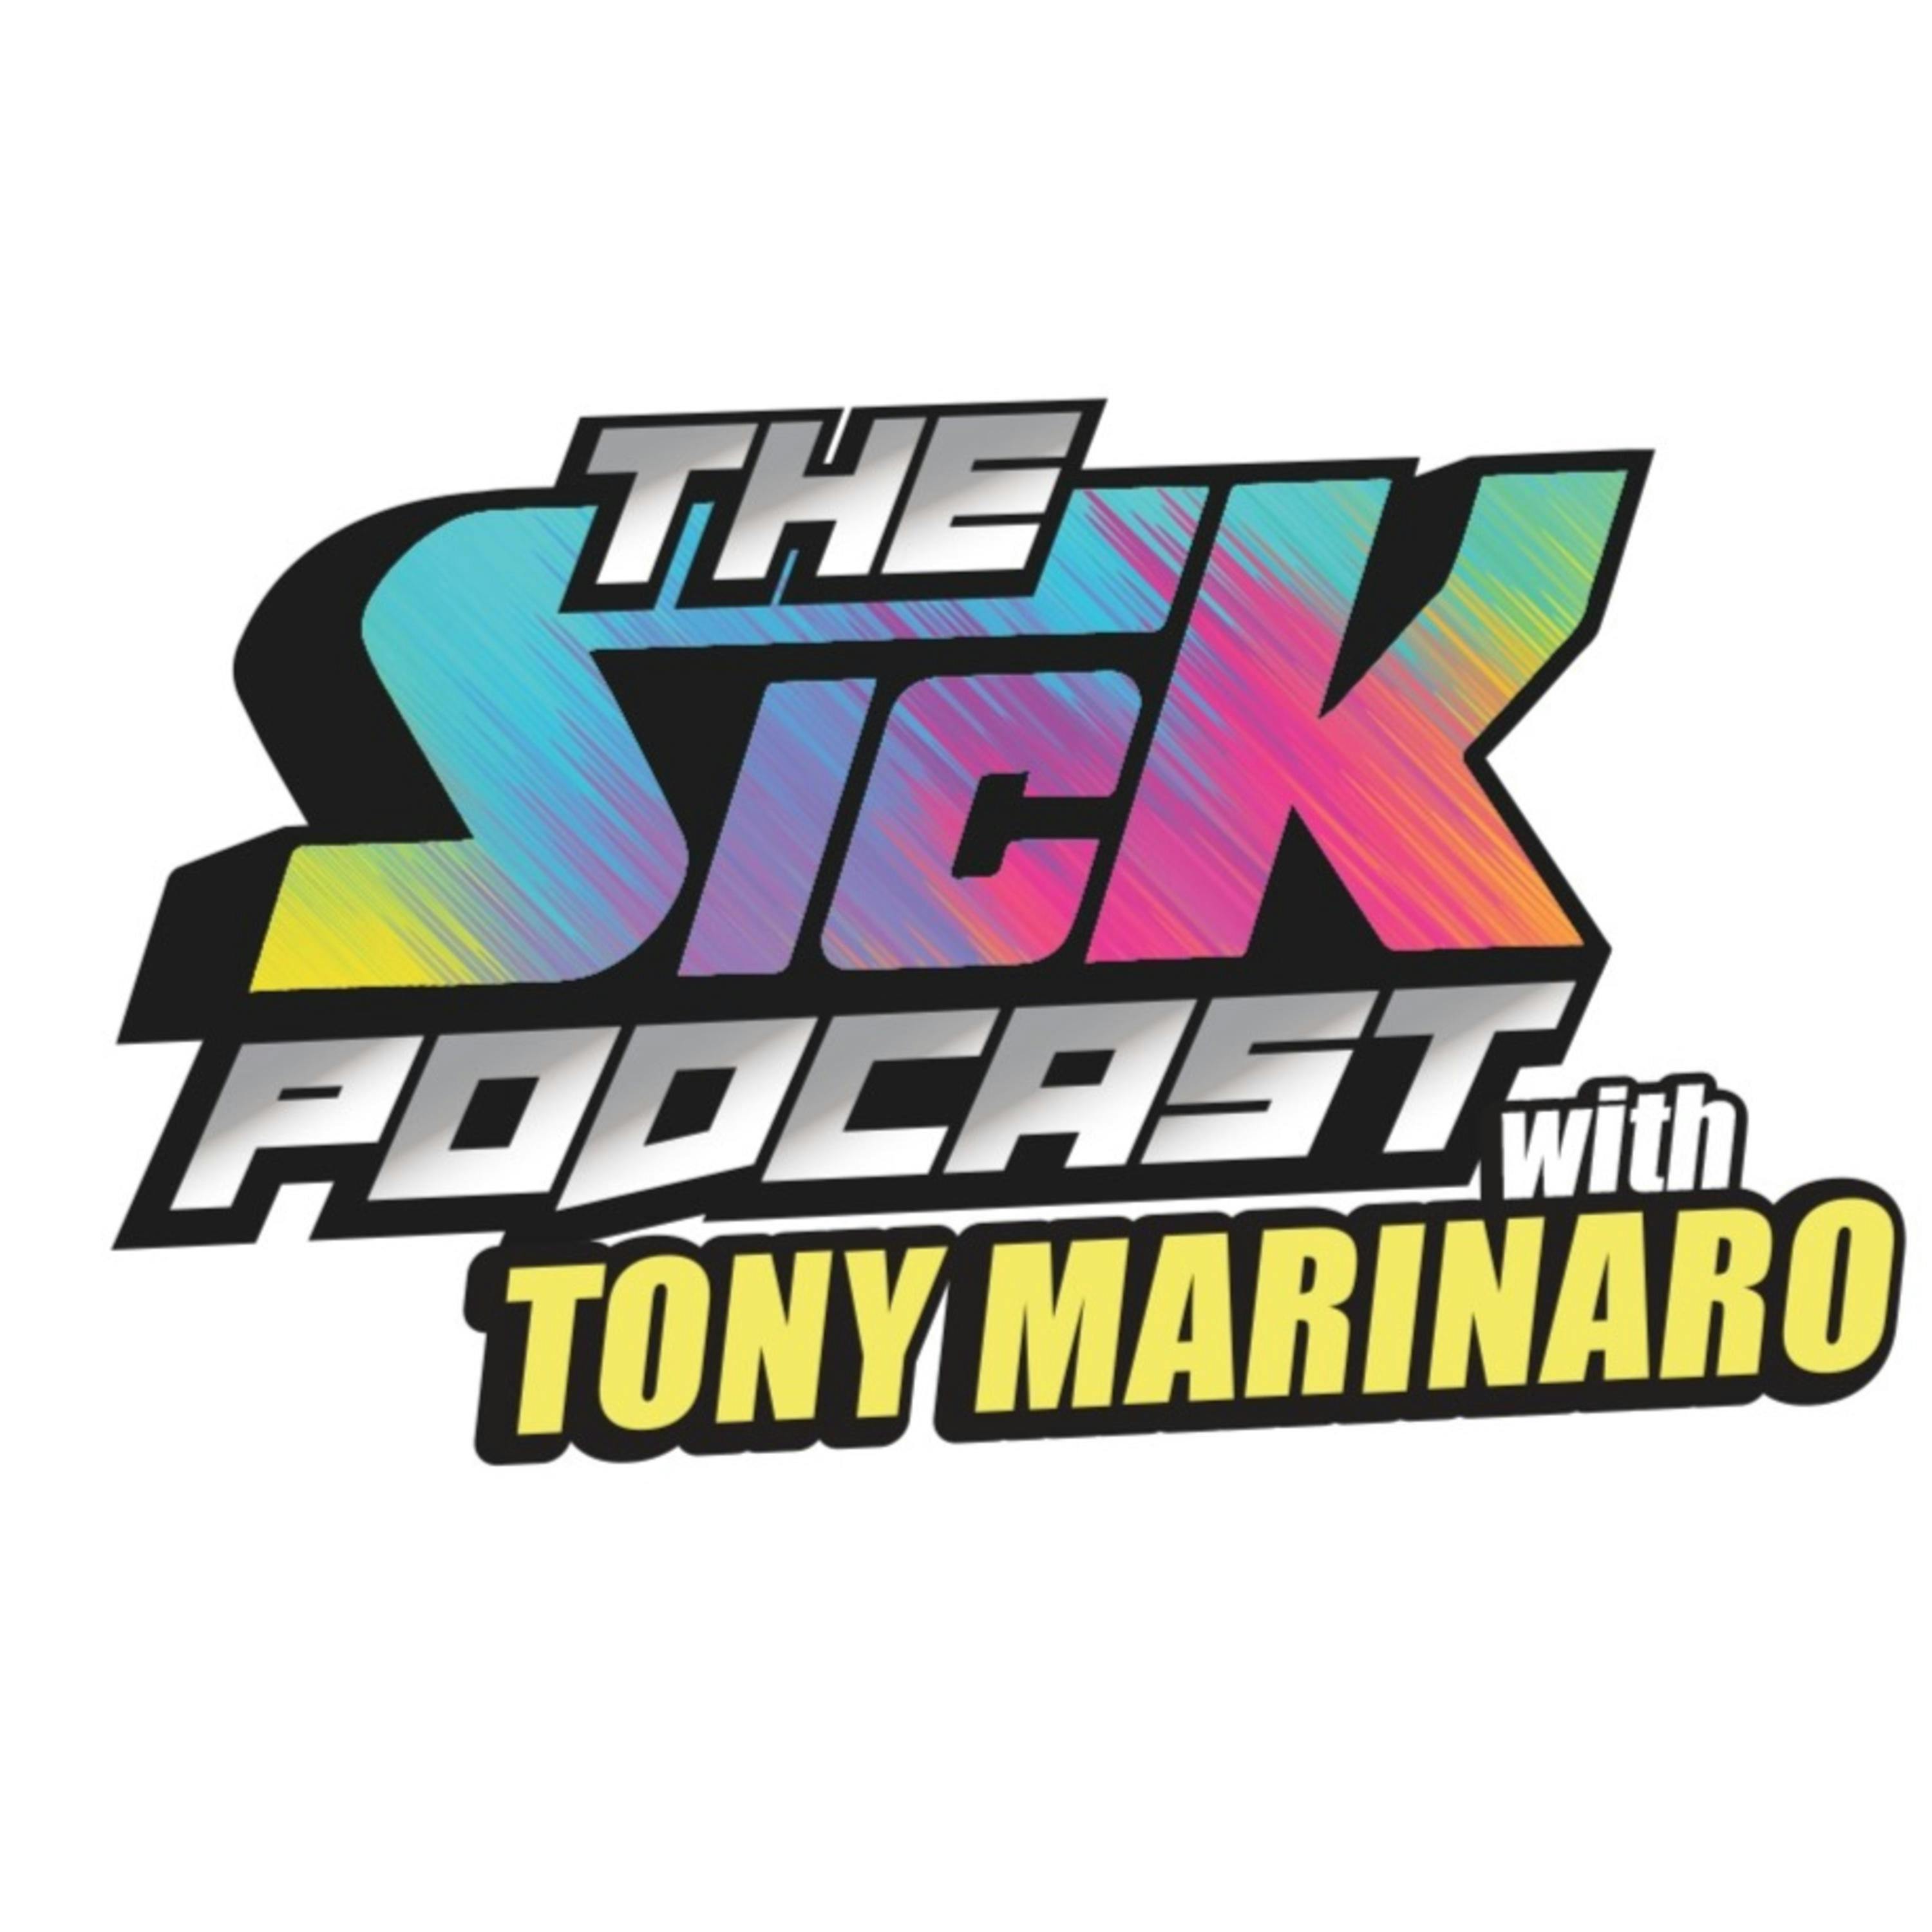 If Teams Want Anderson, They'll Have To Pay! | The Sick Podcast with Matt Ohayon February 17 2023